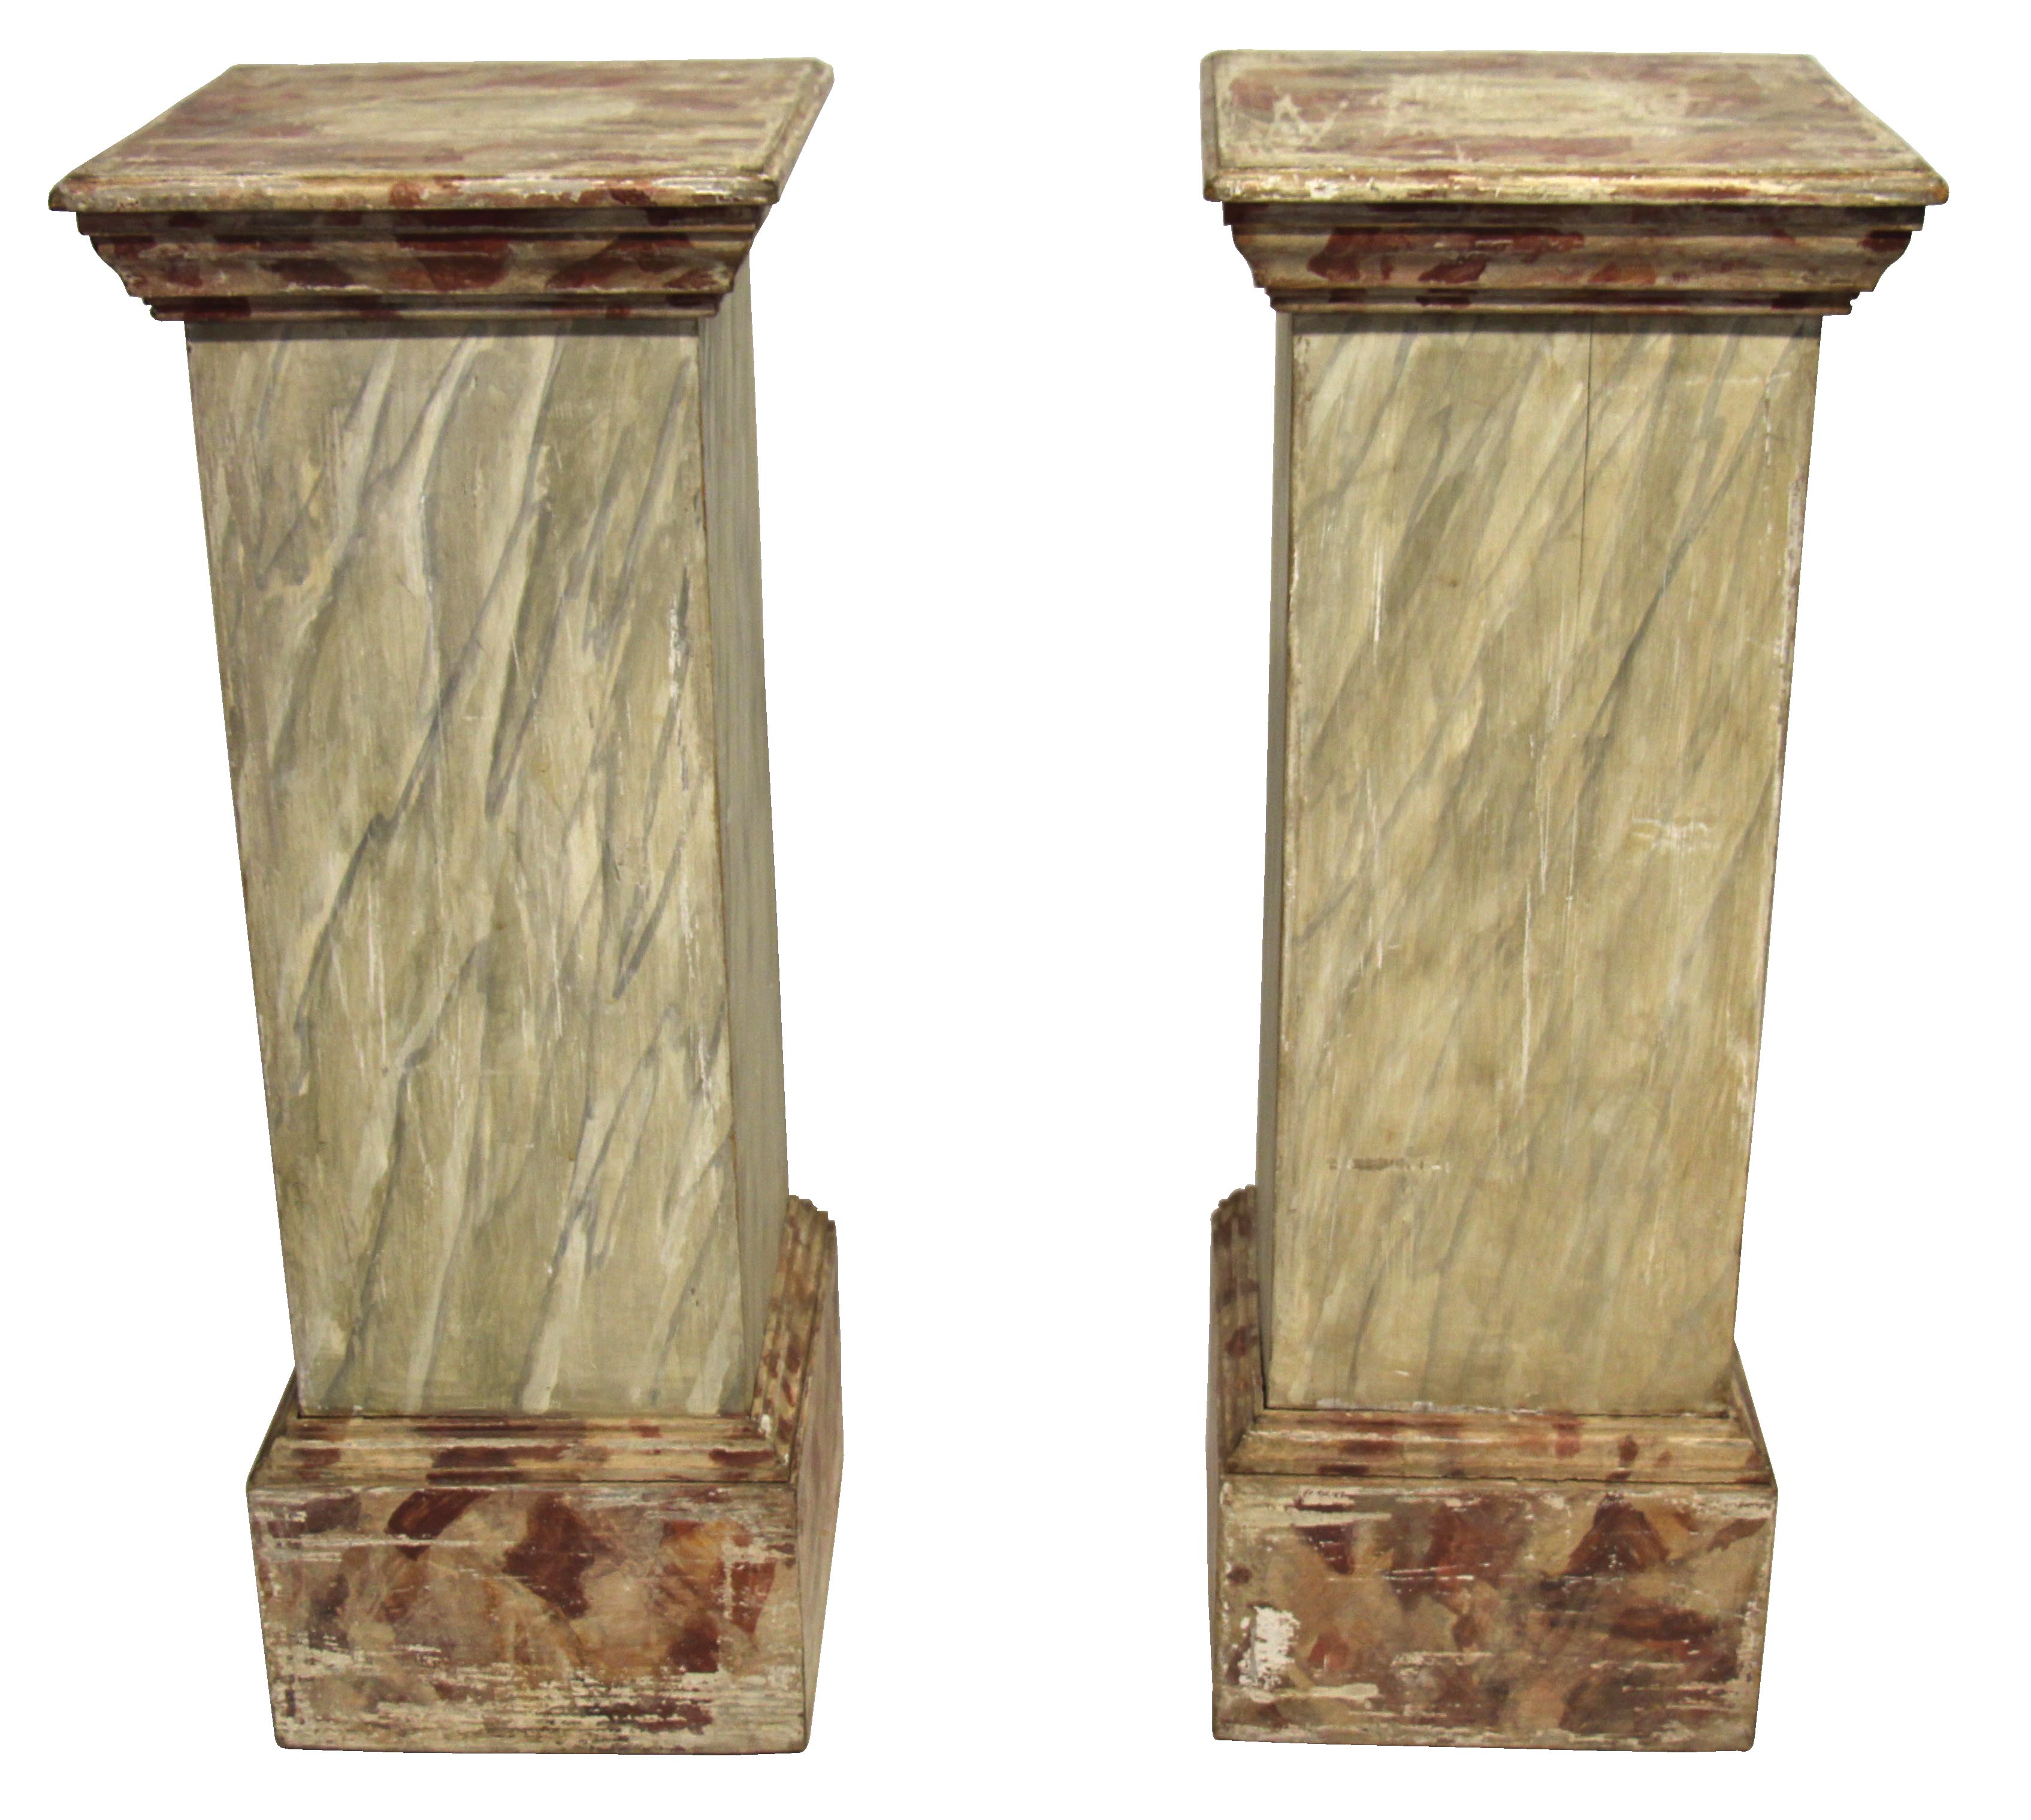 Pair of Hand Painted Pedestals